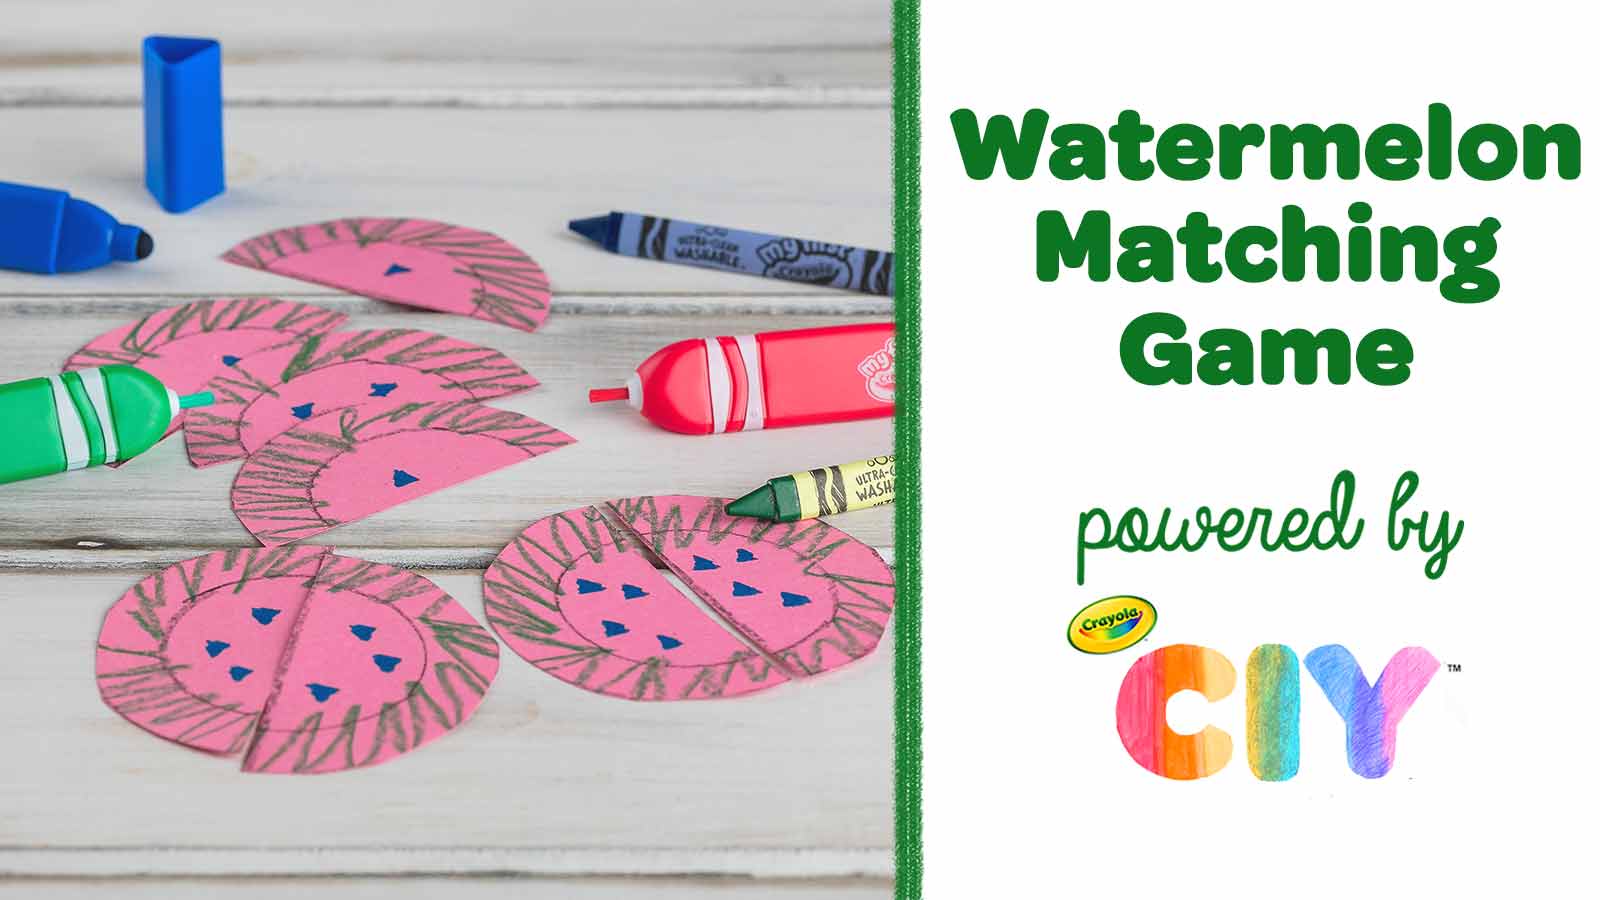 Watermelon Matching Game CIY Video Poster Frame